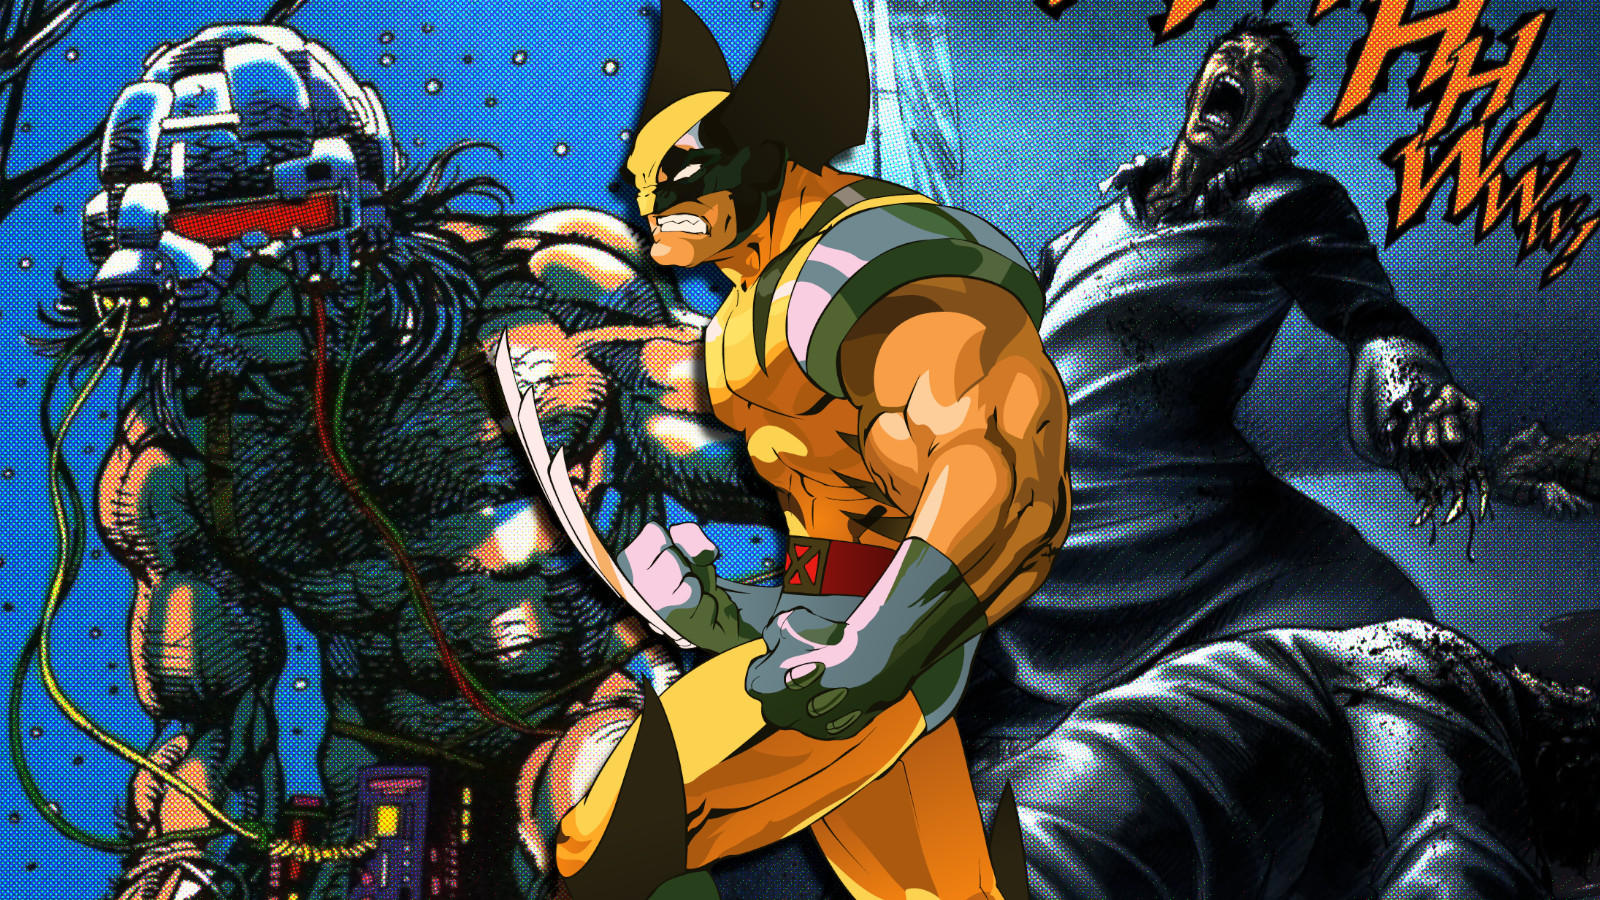 A collage of Wolverine throughout the years